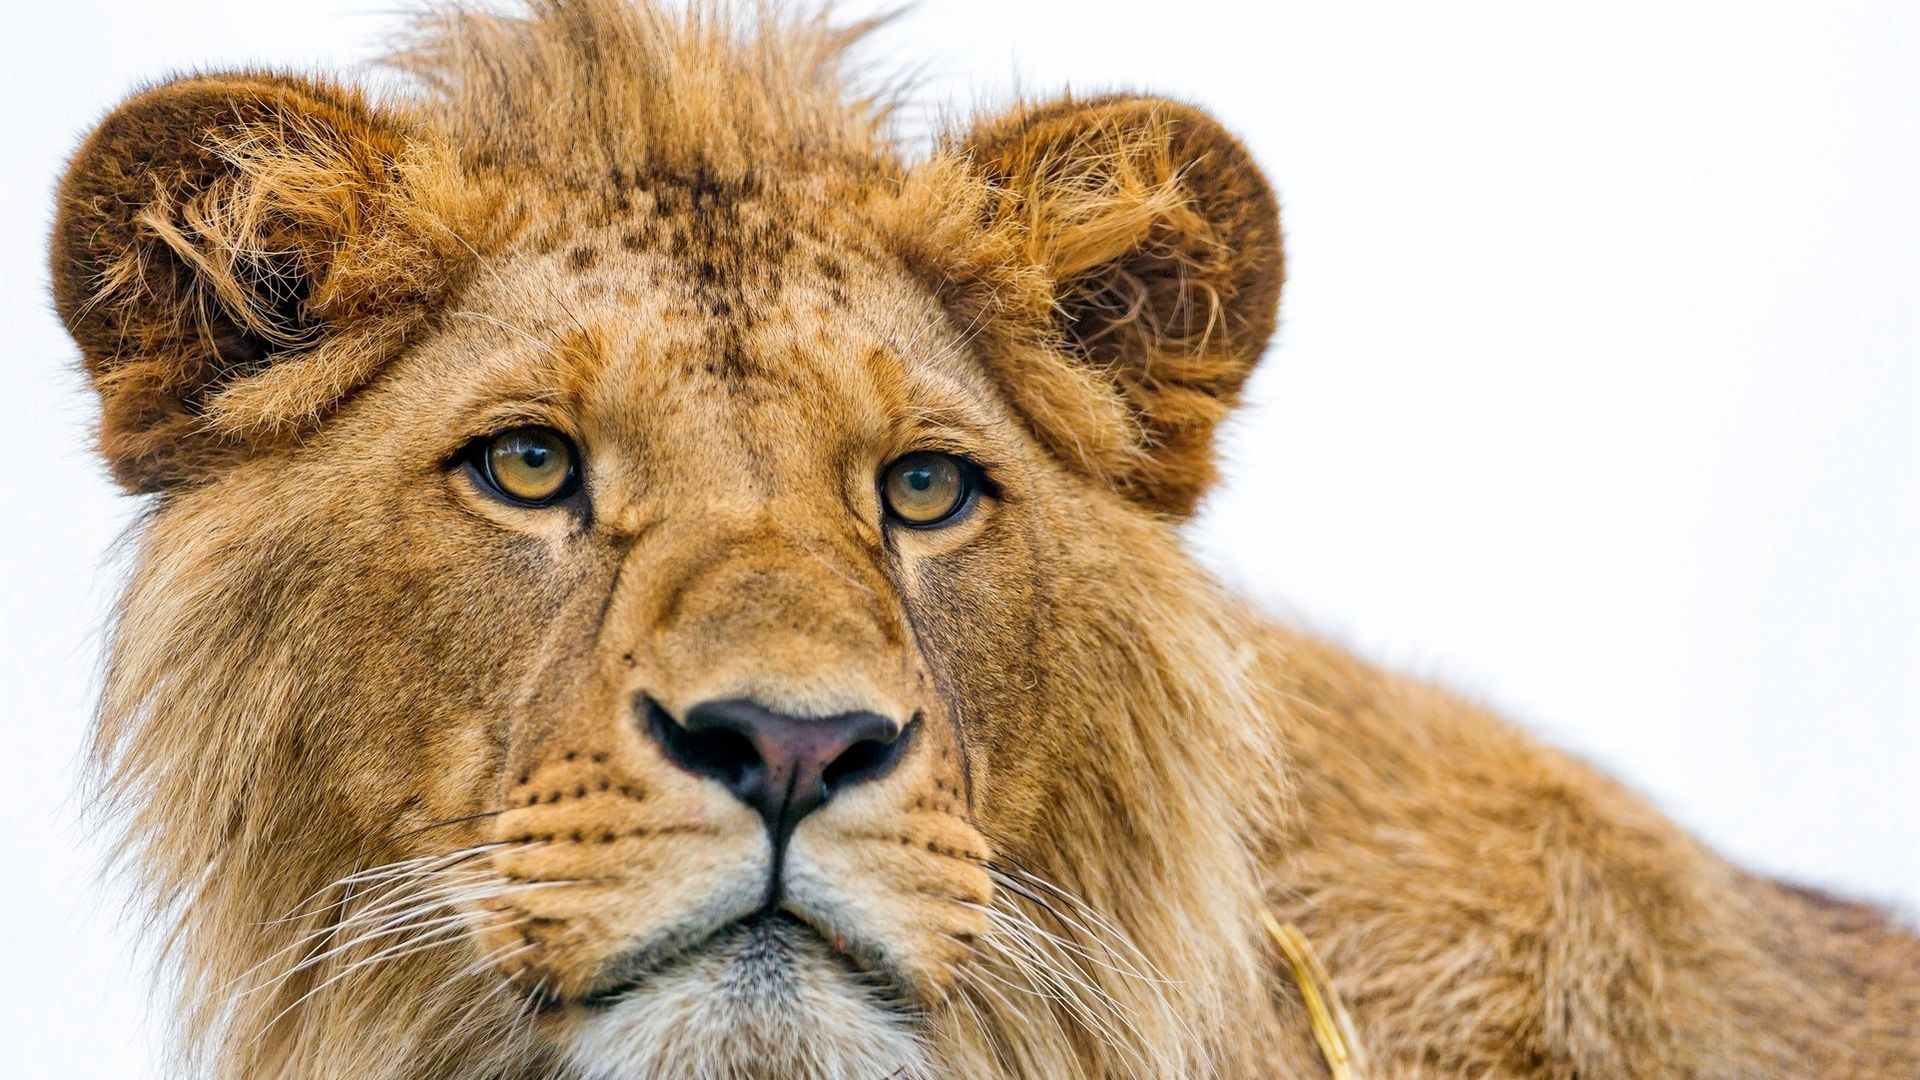 Download wallpaper 1920x1080 lion, young, predator, eyes, face full hd, hdtv,  fhd, 1080p hd background